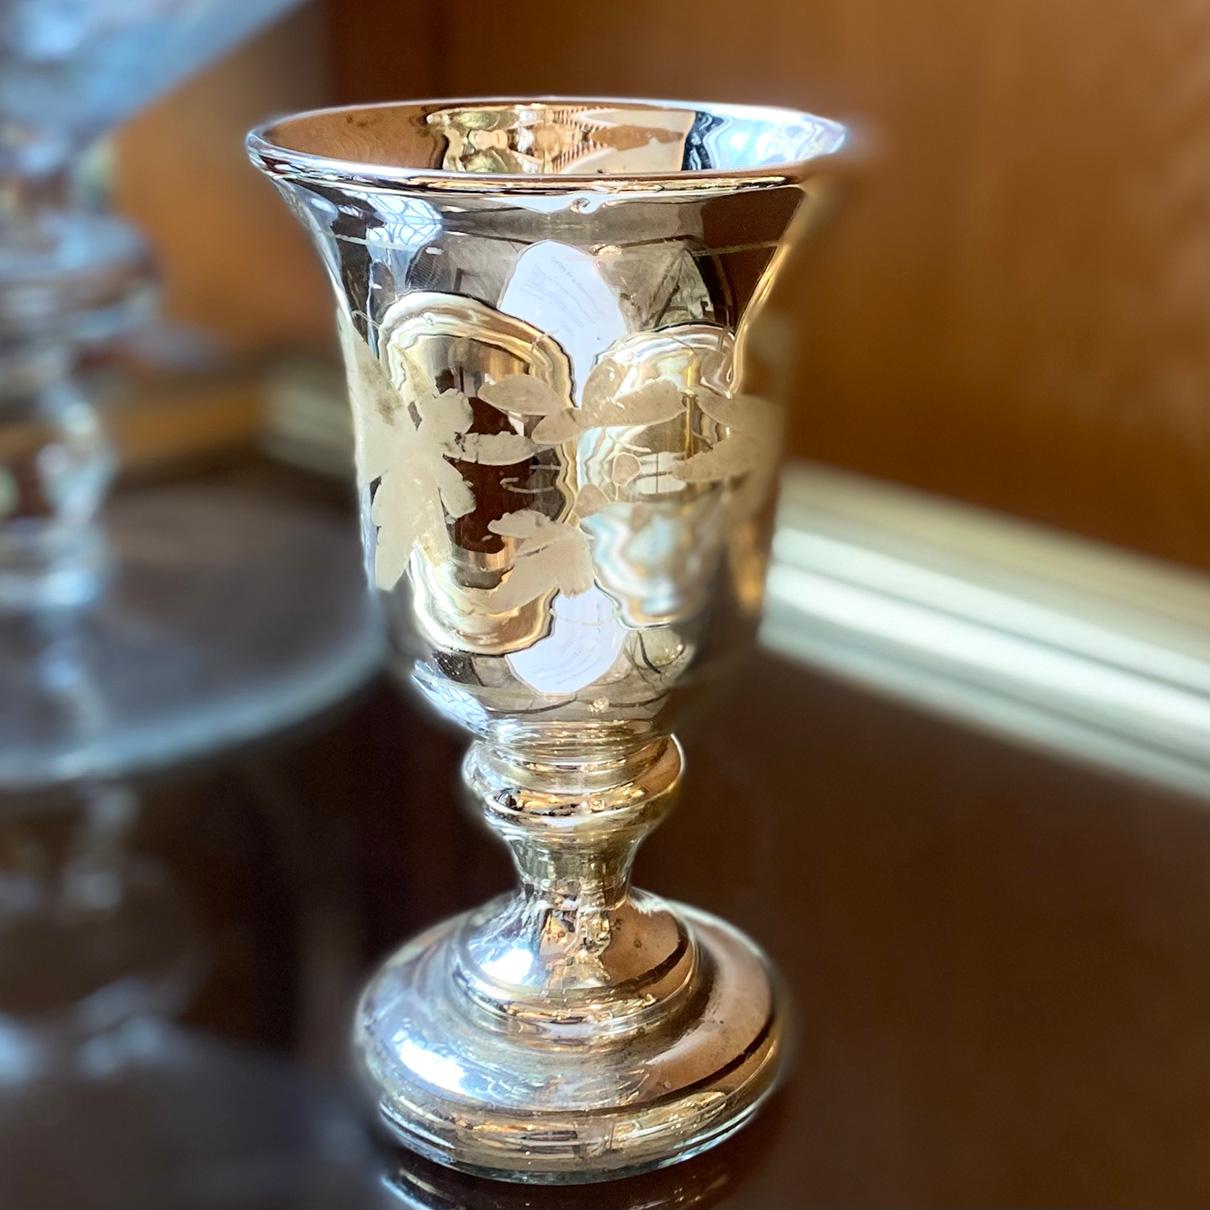 A circa 1920s French etched and mercury glass cup with foliage details.

Measurements:
Height: 6.5?
Diameter at widest: 3.75?.